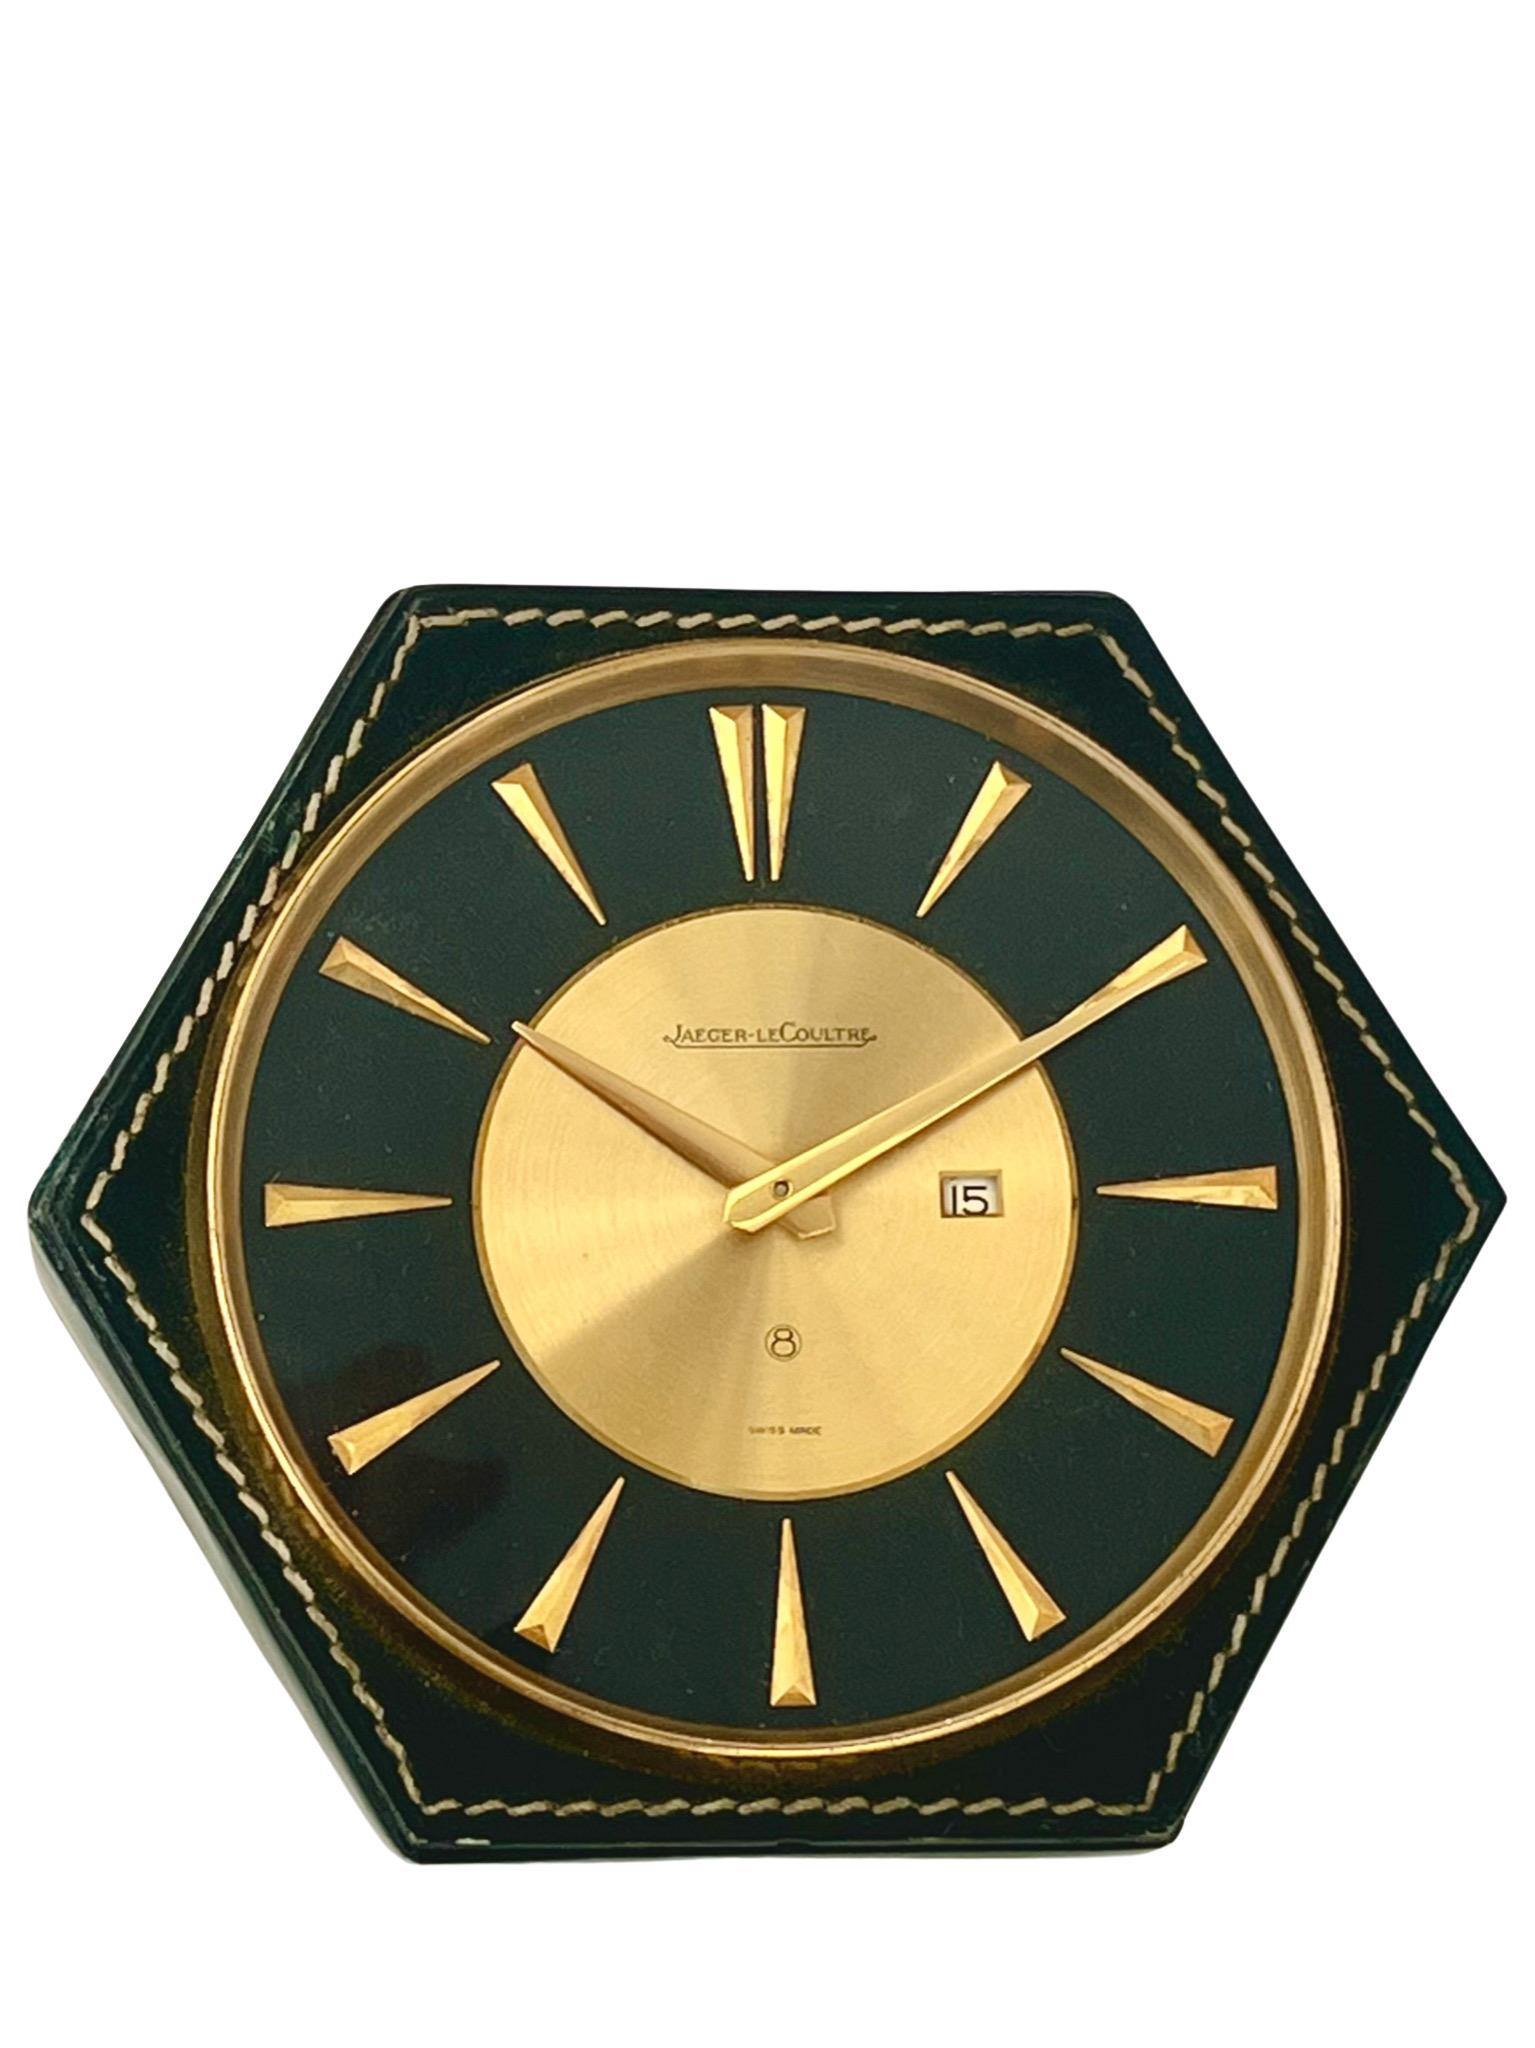 Hermés Jaeger LeCoultre Mid-Century Leather Stitched Desk Clock In Good Condition In London, GB